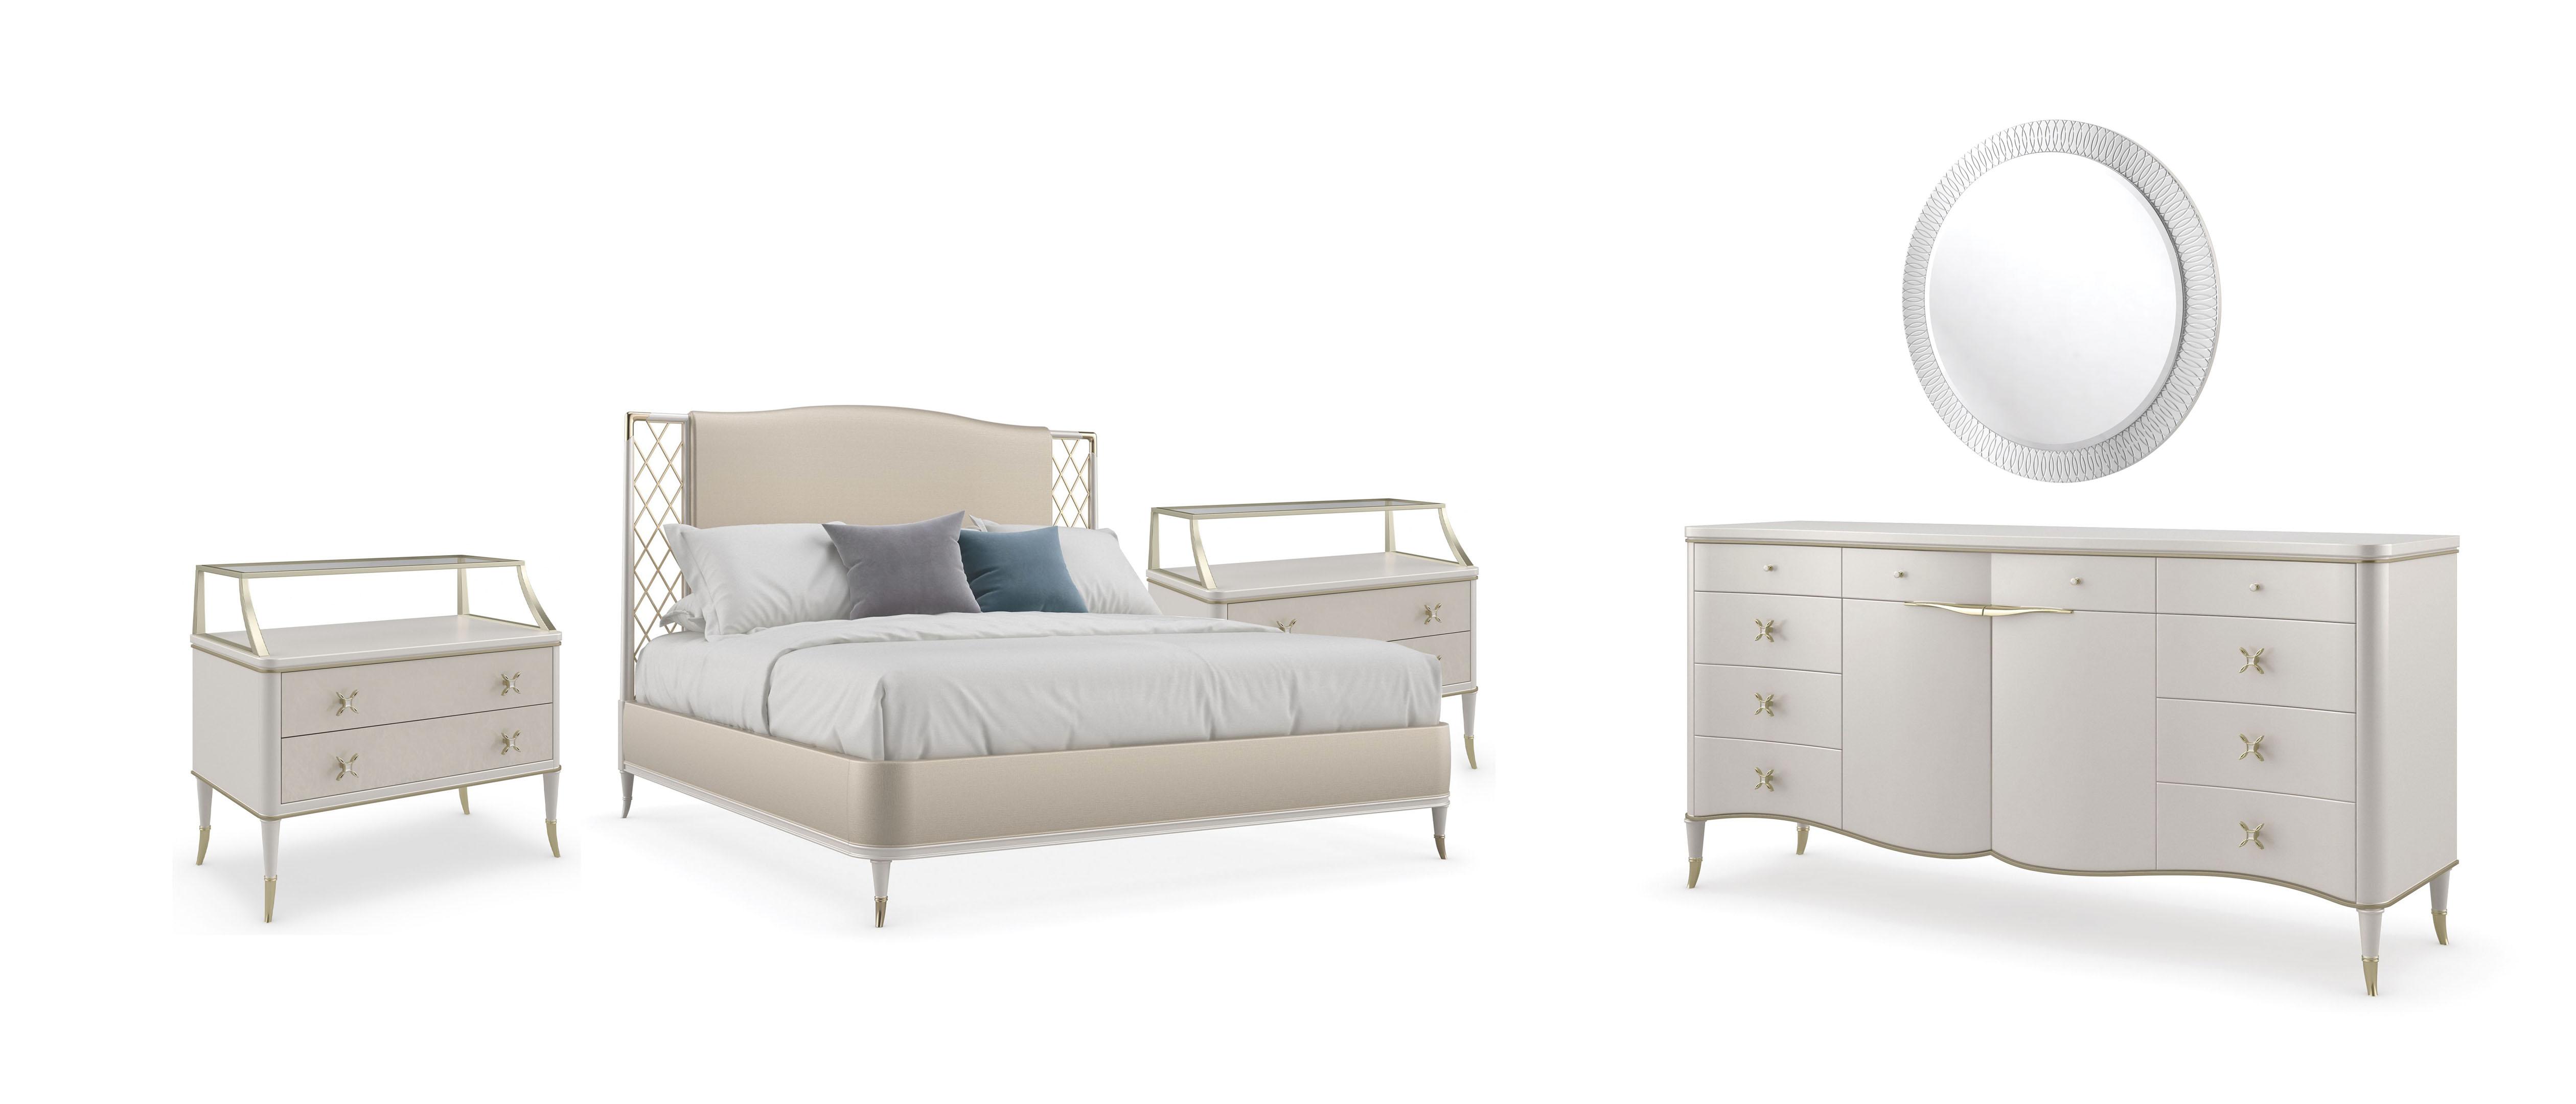 Contemporary Platform Bedroom Set STAR OF THE NIGHT-KING / ALL DOLLED UP / BELLE OF THE BALL / PAST REFLECTIONS CLA-021-101-2NDM-5PC in Cream, Gold Velvet